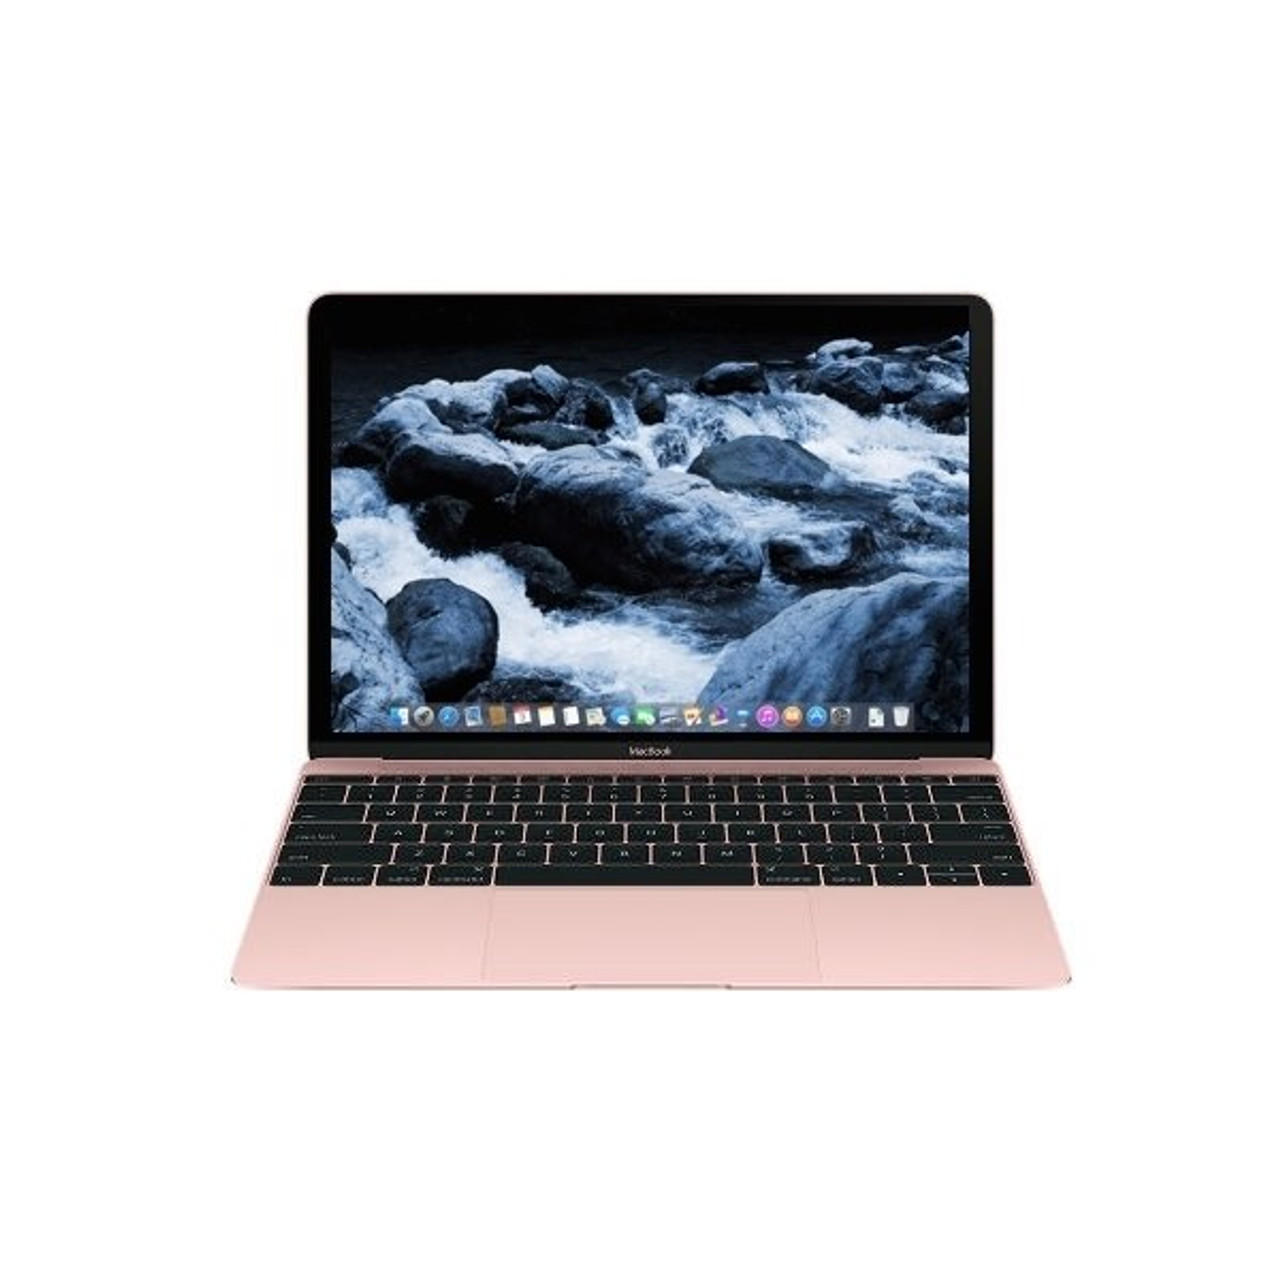 Chinese (Pinyin) Keyboard*: Apple MacBook 12-inch 1.3GHz Core i5 (Mid 2017,  Rose Gold) MNYG2LL/A